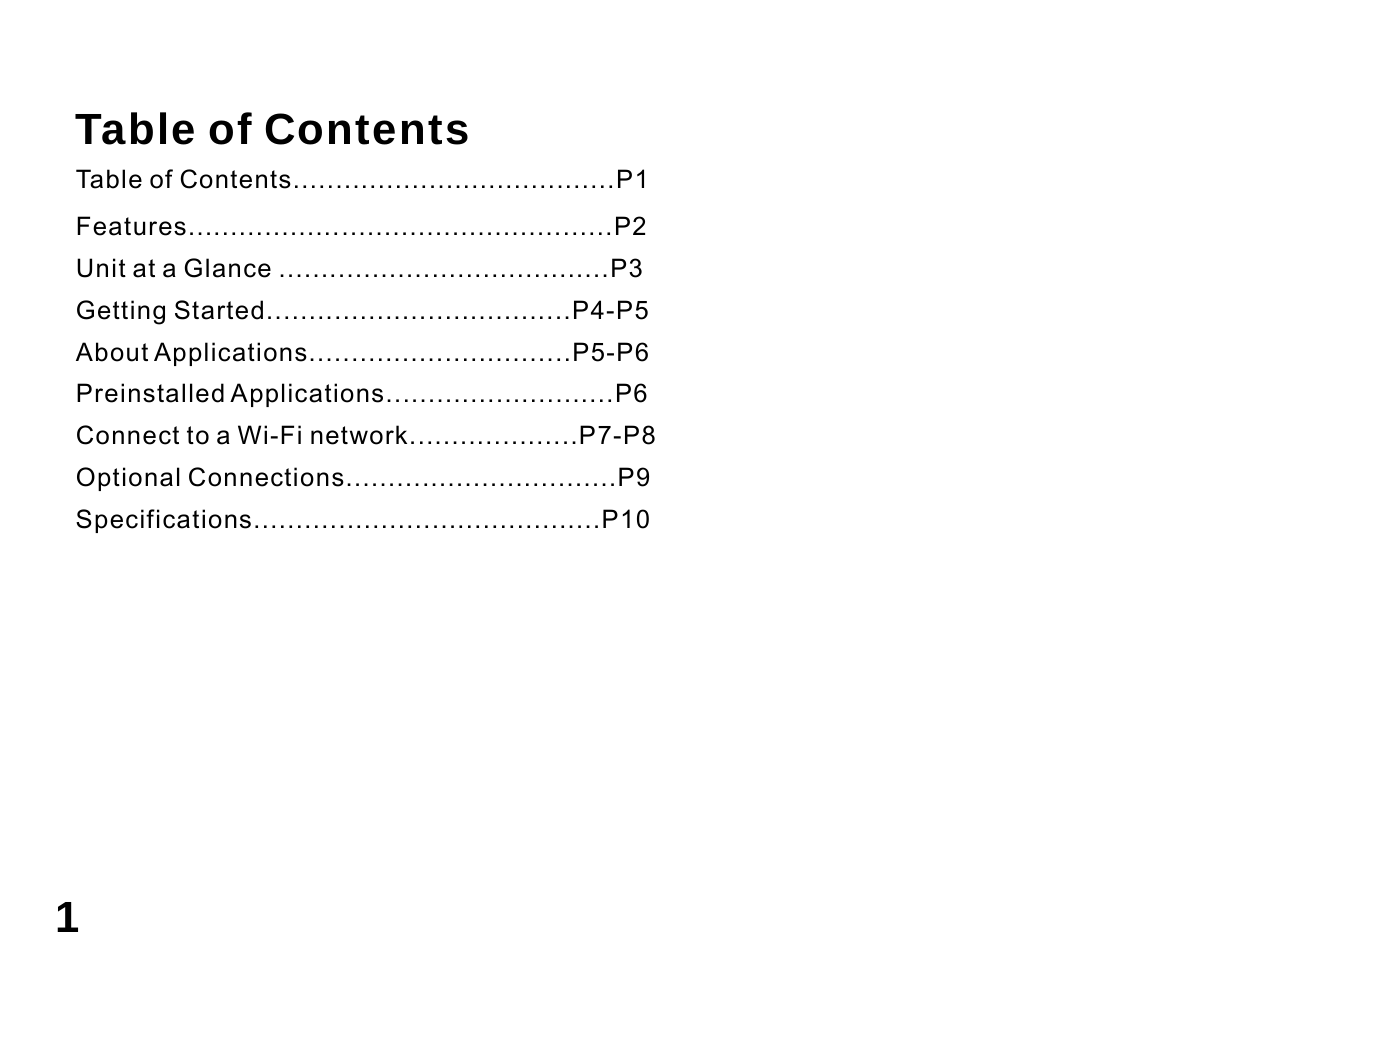   Table of Contents Table of Contents......................................P1 Features..................................................P2 Unit at a Glance .......................................P3 Getting Started....................................P4-P5 About Applications...............................P5-P6 Preinstalled Applications...........................P6 Connect to a Wi-Fi network....................P7-P8 Optional Connections................................P9 Specifications.........................................P10           1 